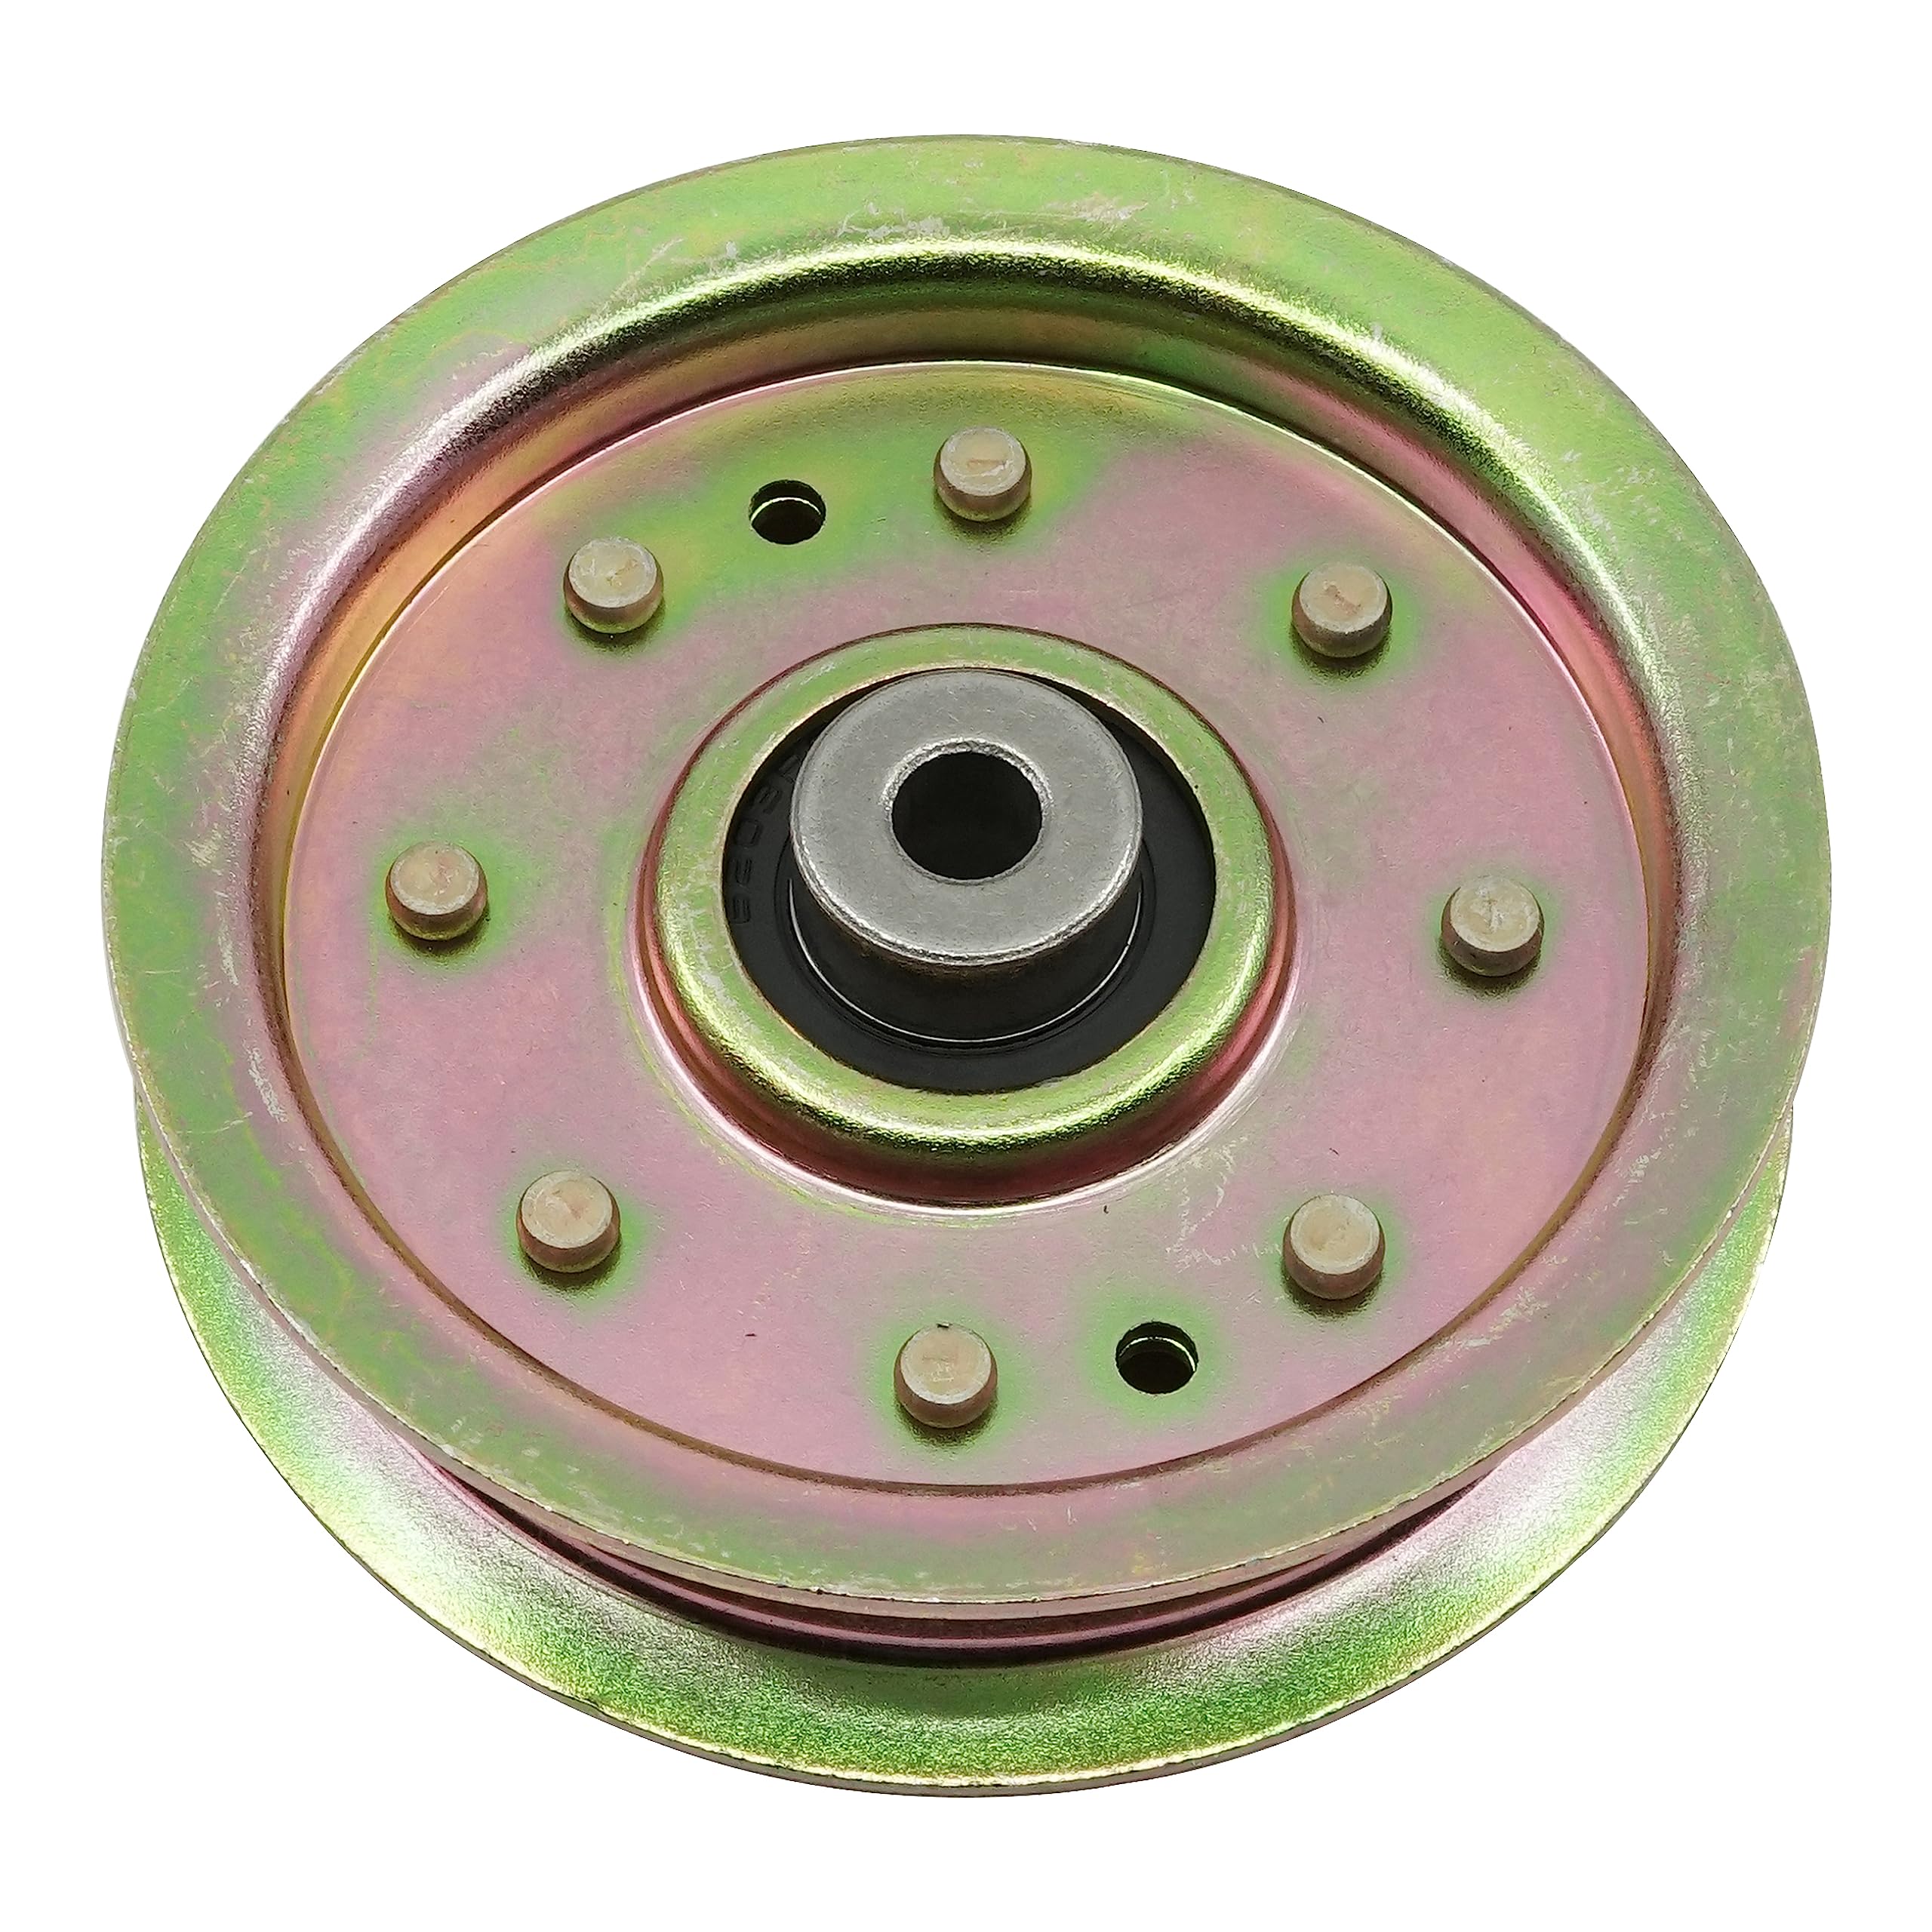 Caltric Idler Pulley Compatible With Ayp Poulan Craftsman Husqvarna 532173981 173981